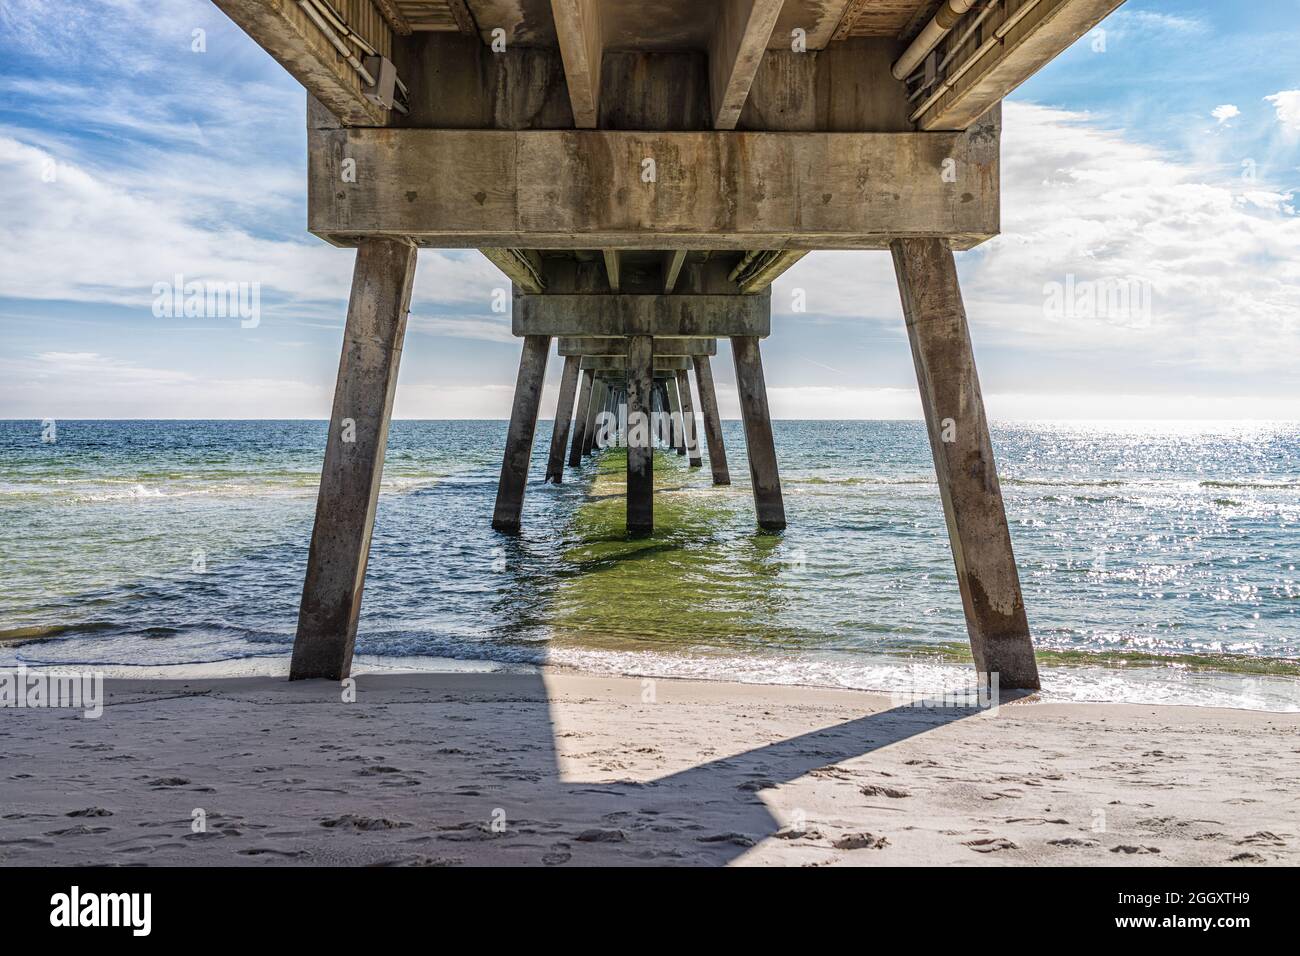 Under famous Okaloosa Island fishing pier in Fort Walton Beach, Florida winter season with pillars, green waves in Panhandle, Gulf of Mexico emerald c Stock Photo